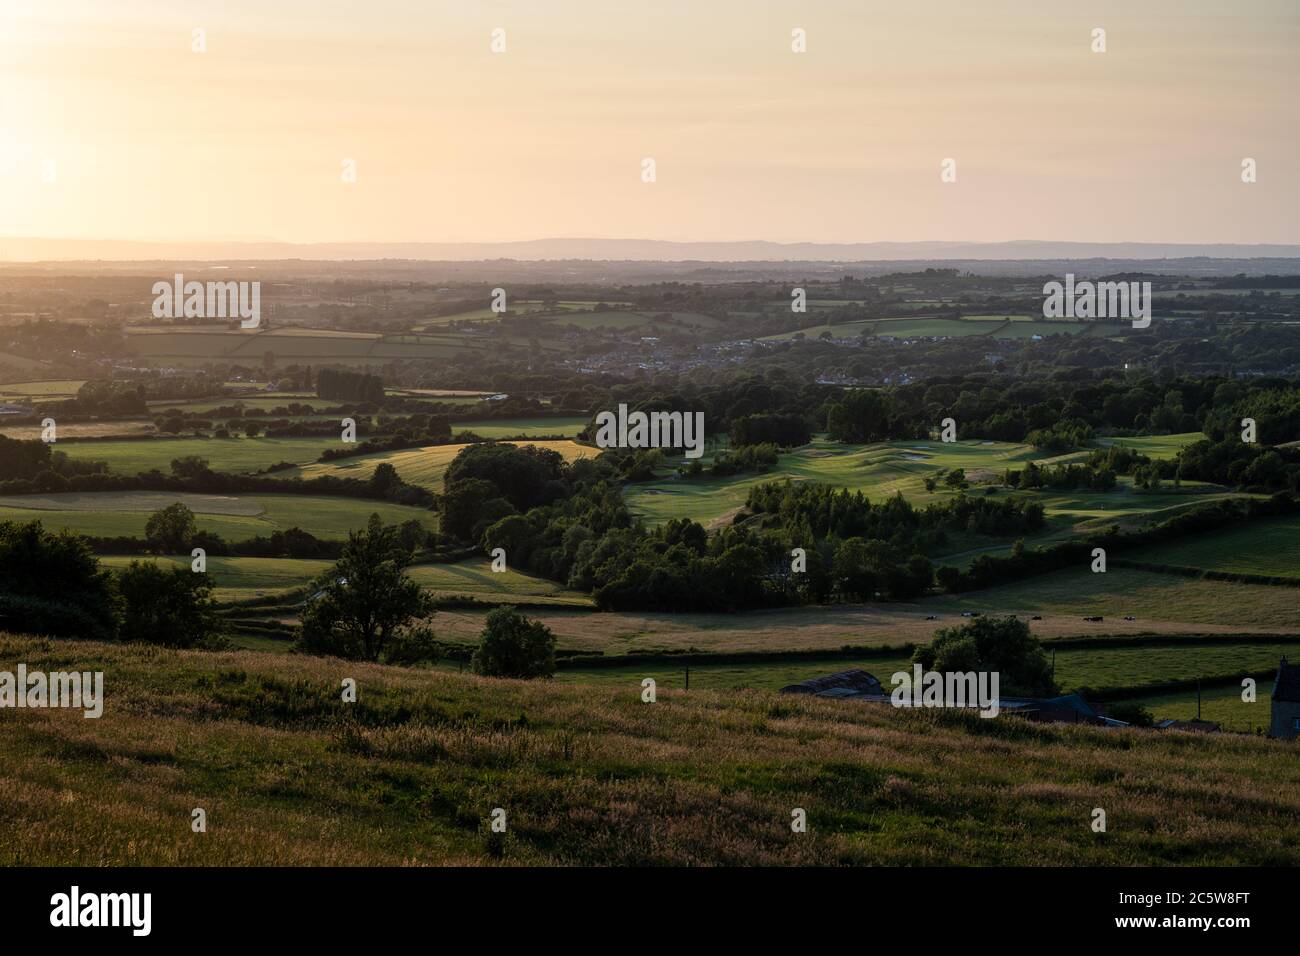 A patchwork of farmland fields, coppice woodland, villages and golf courses covers the lowland landscape of South Gloucestershire, below the scarp of Stock Photo